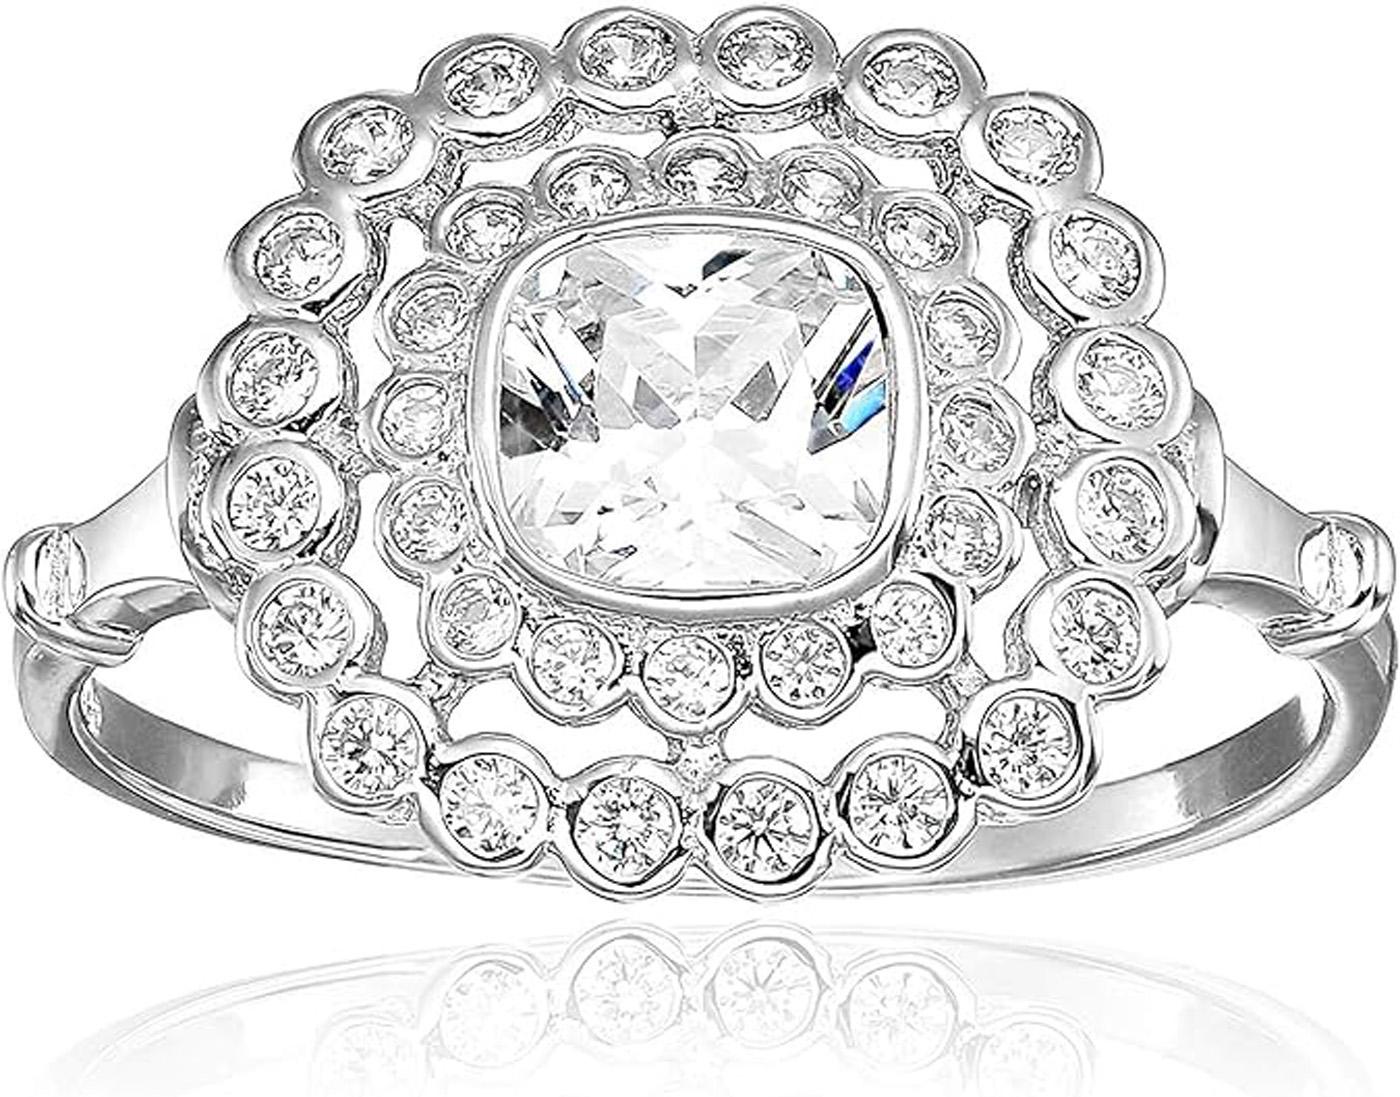 DECADENCE Sterling Silver 6mm Cushion Bezel Set Halo Cubic Zirconia Engagement Ring Size 8